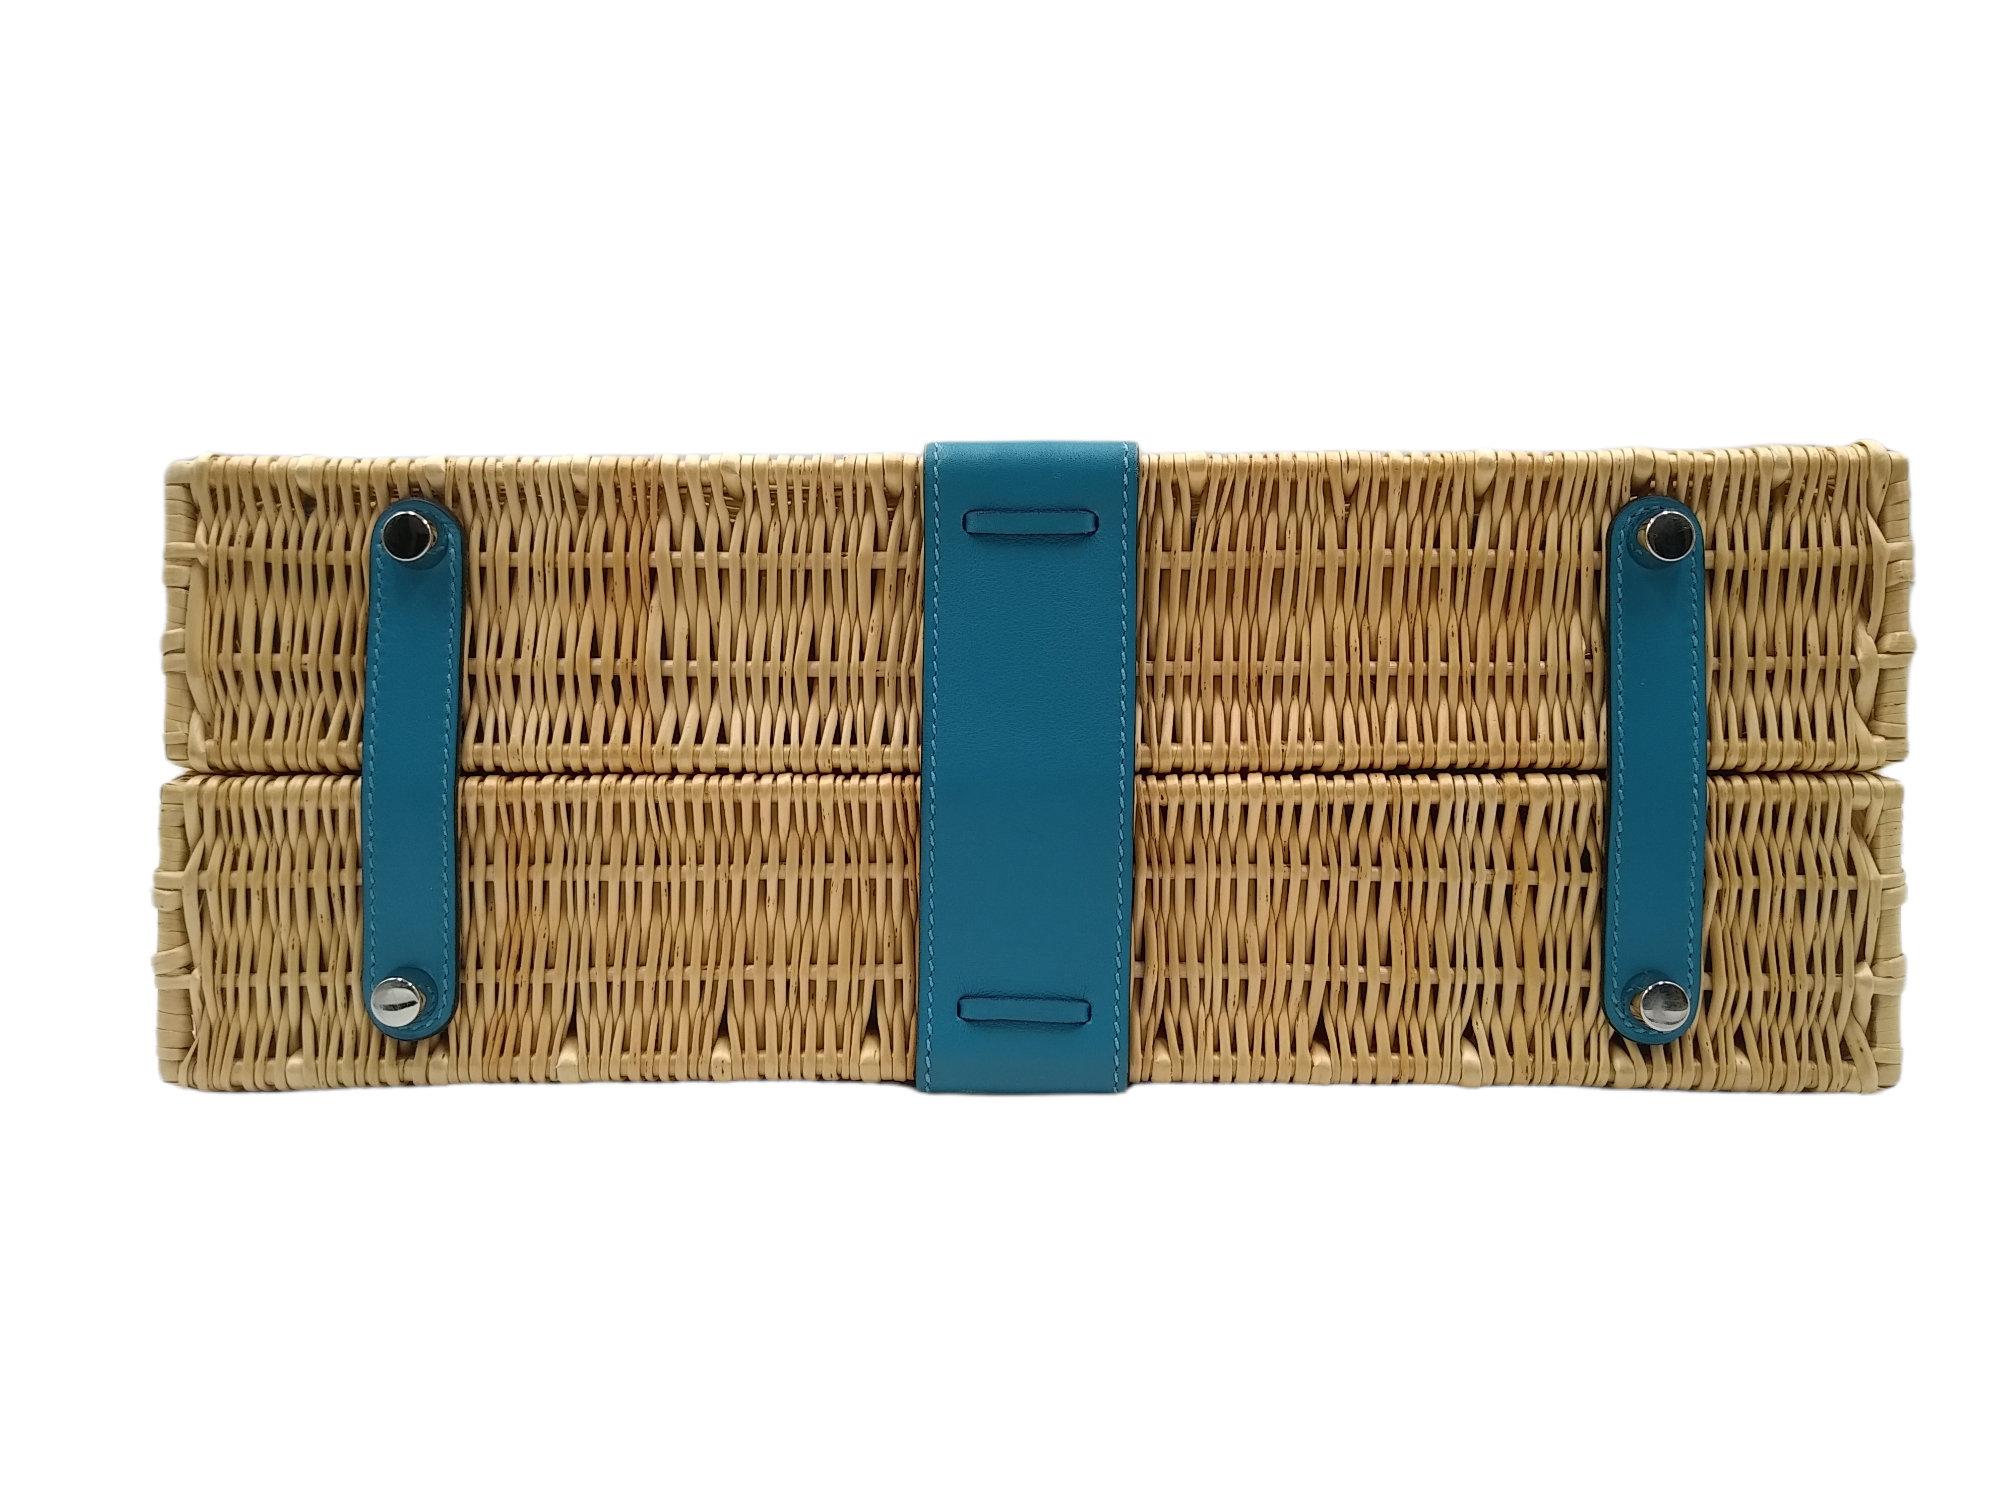 Hermès Wicker and Turquoise Barenia Leather Picnic Bag Kelly 35cm  For Sale 7